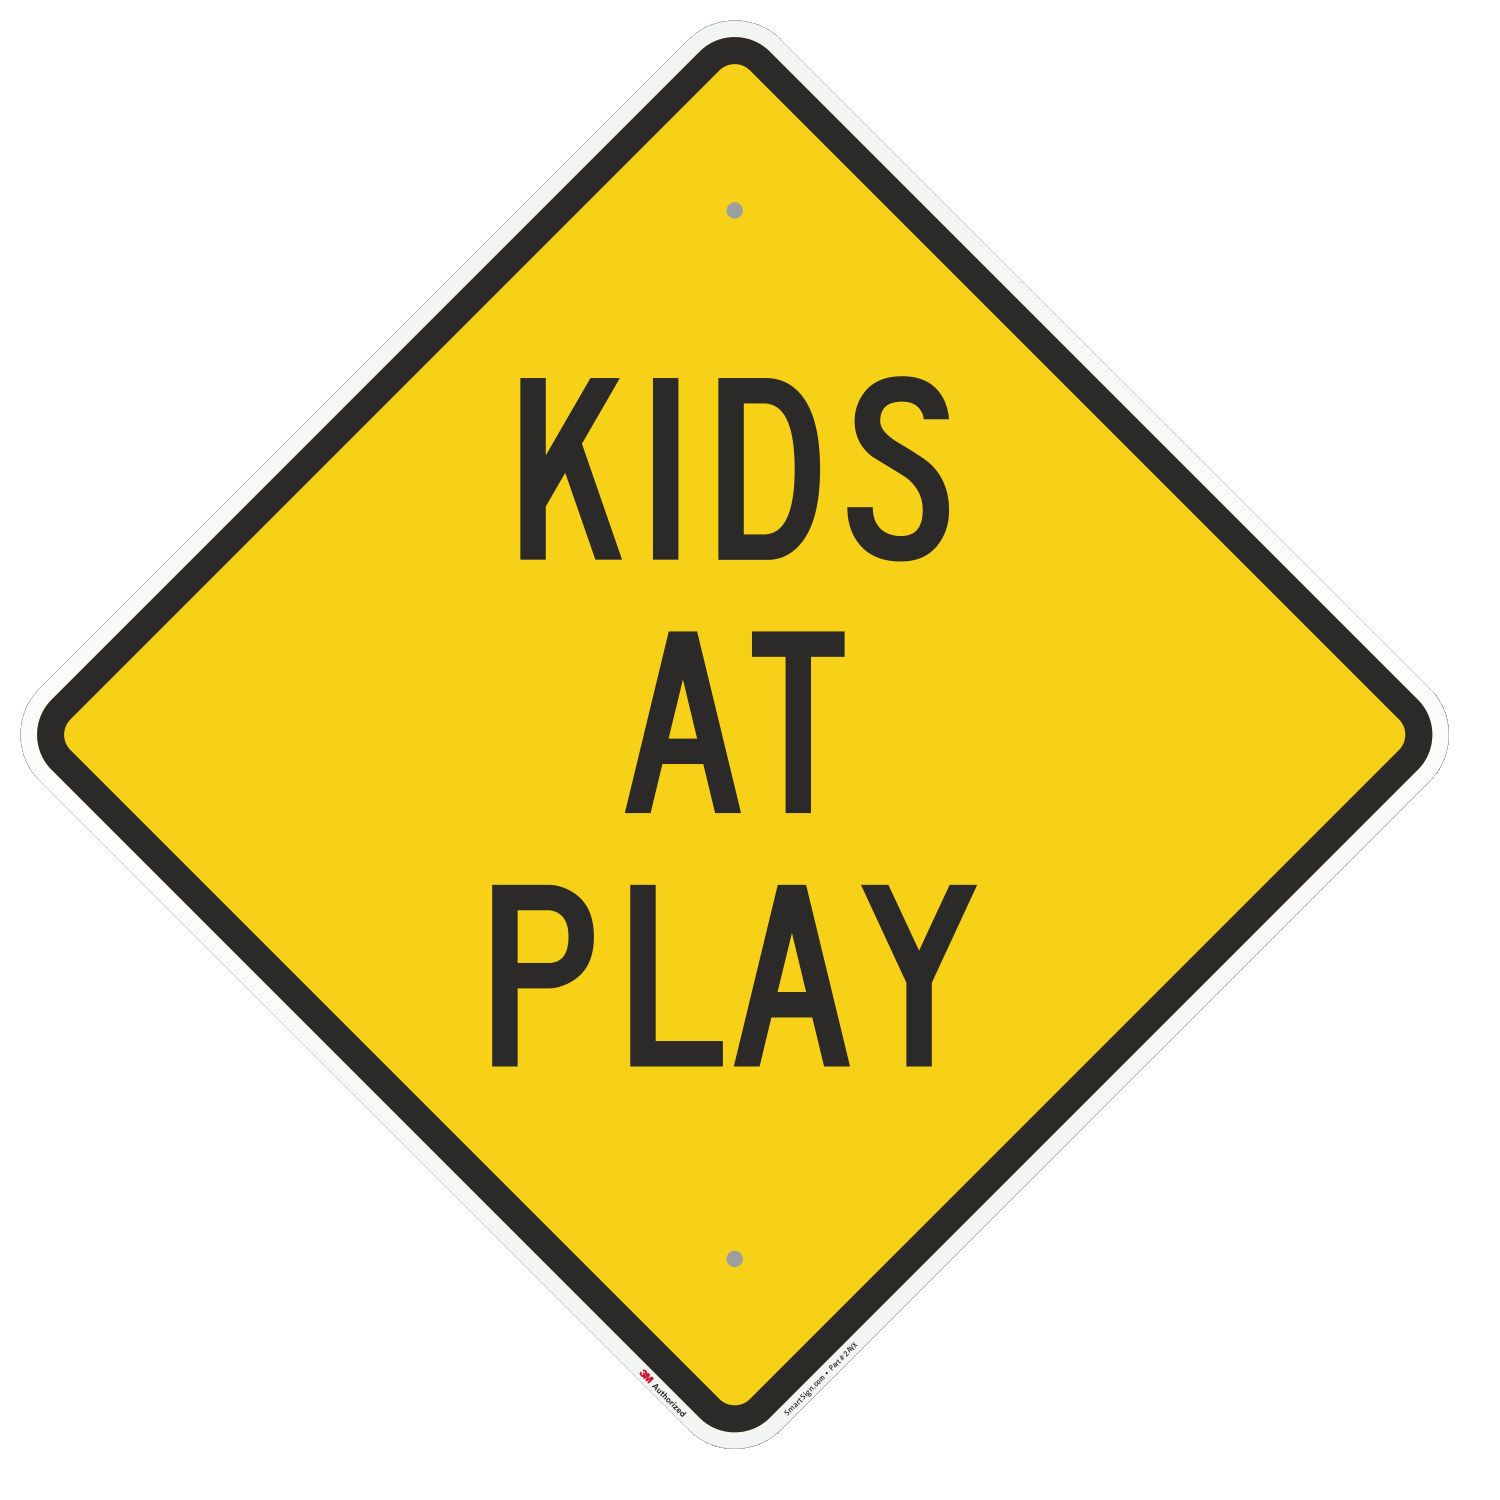 2X SLOW DOWN CHILDREN PLAYING SAFETY/WARNING SIGN FARM SAFETY/WARNING SIGN 